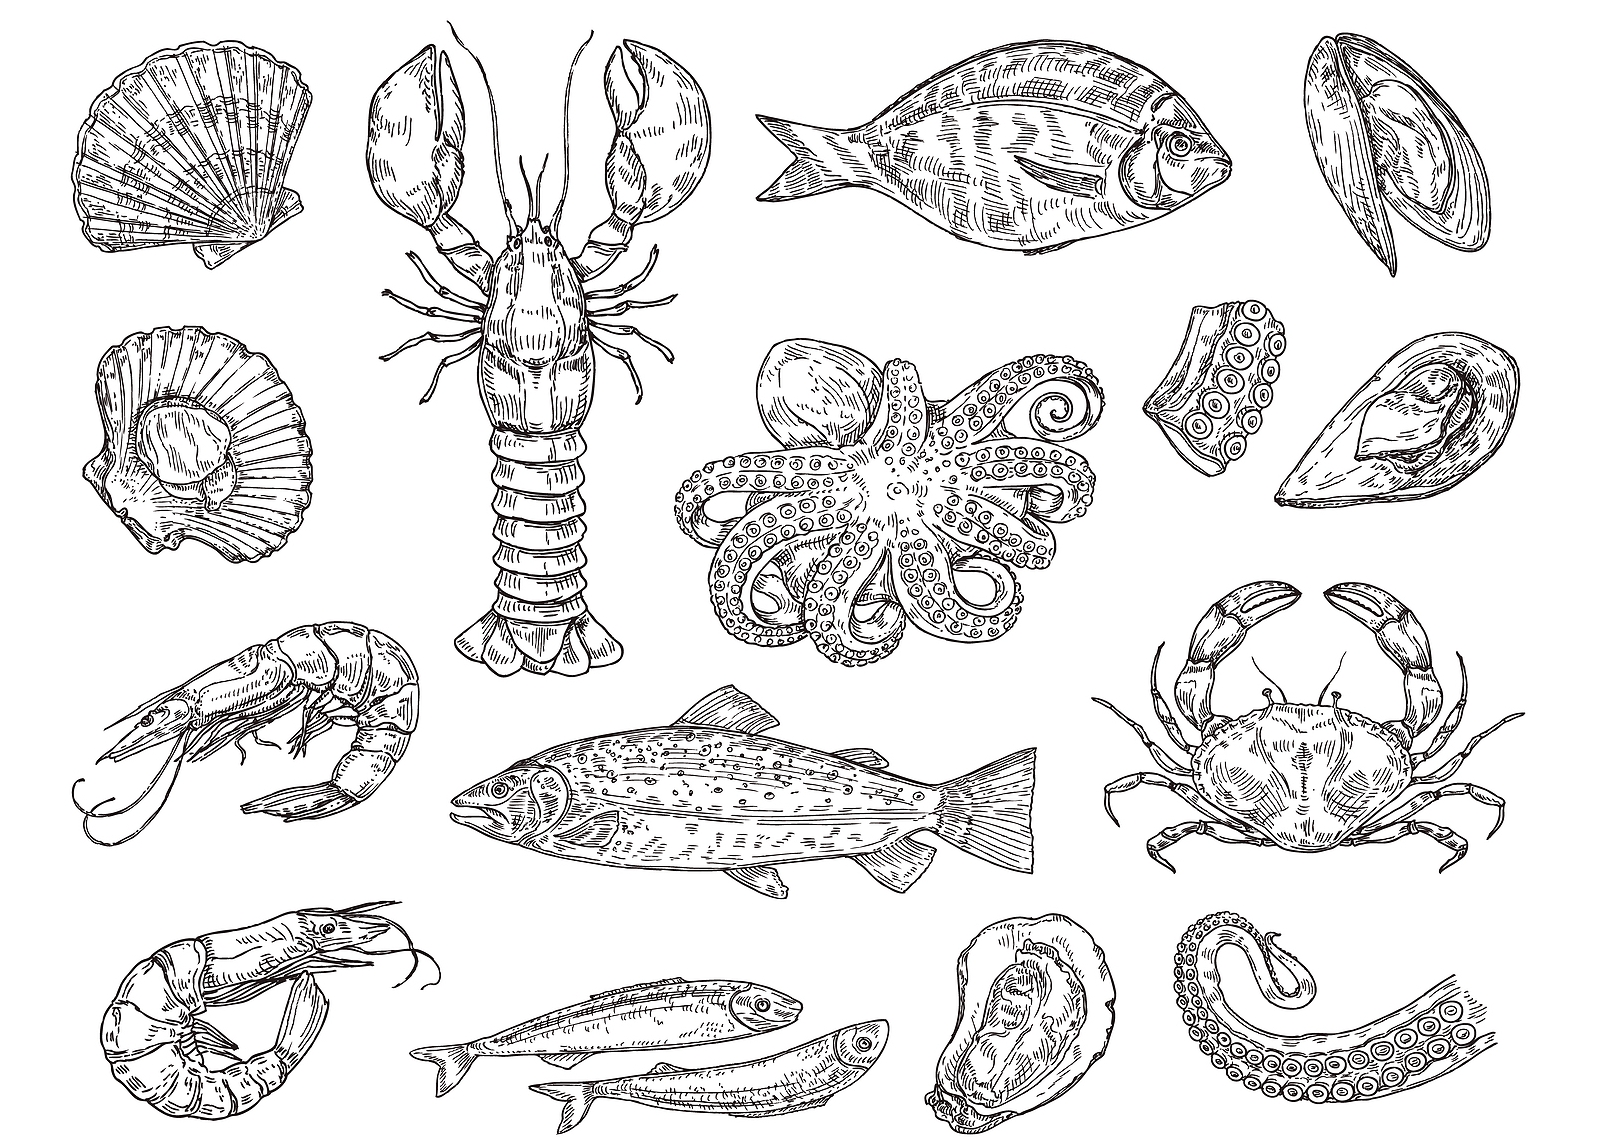 Marine life including fish, shrimp, oysters, and mussels are being used in homeopathic research